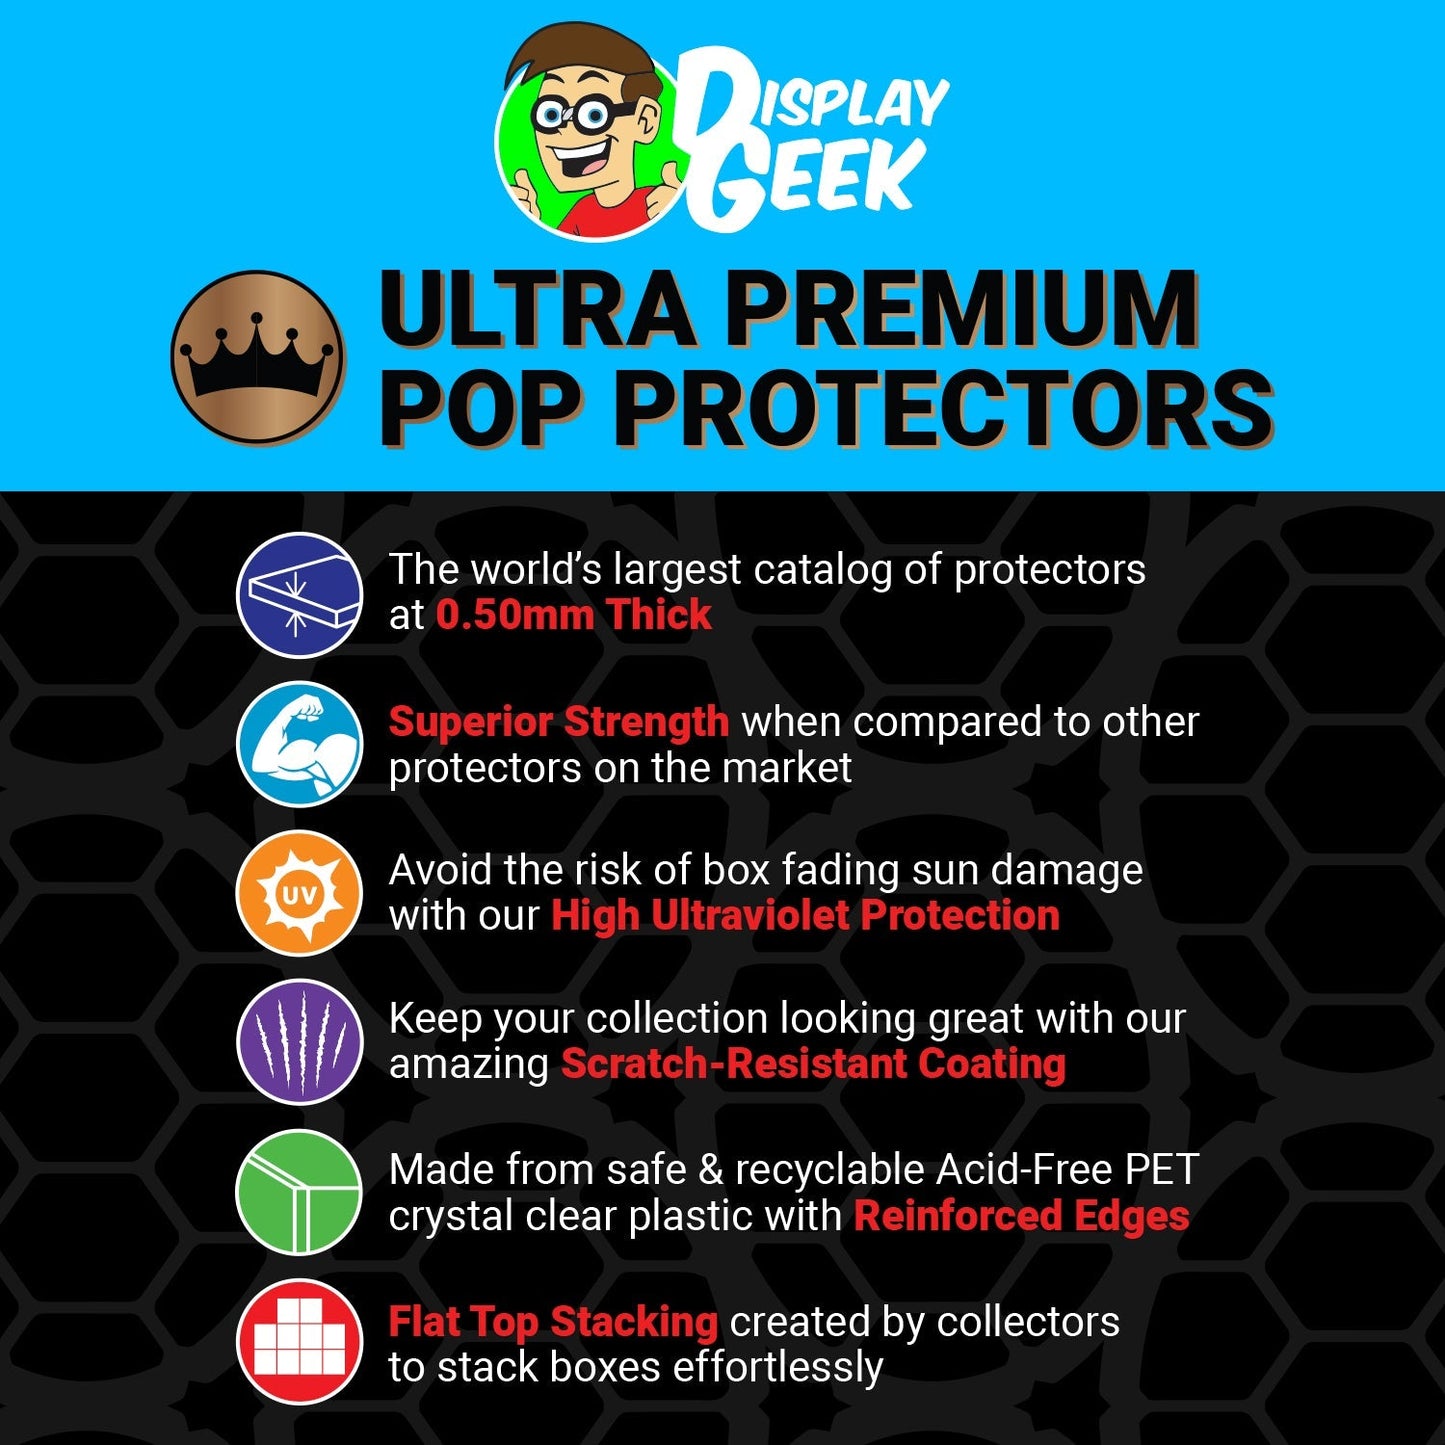 Pop Protector for Carl & Ellie Painting NYCC #979 Funko Pop Moment - PPG Pop Protector Guide Search Created by Display Geek